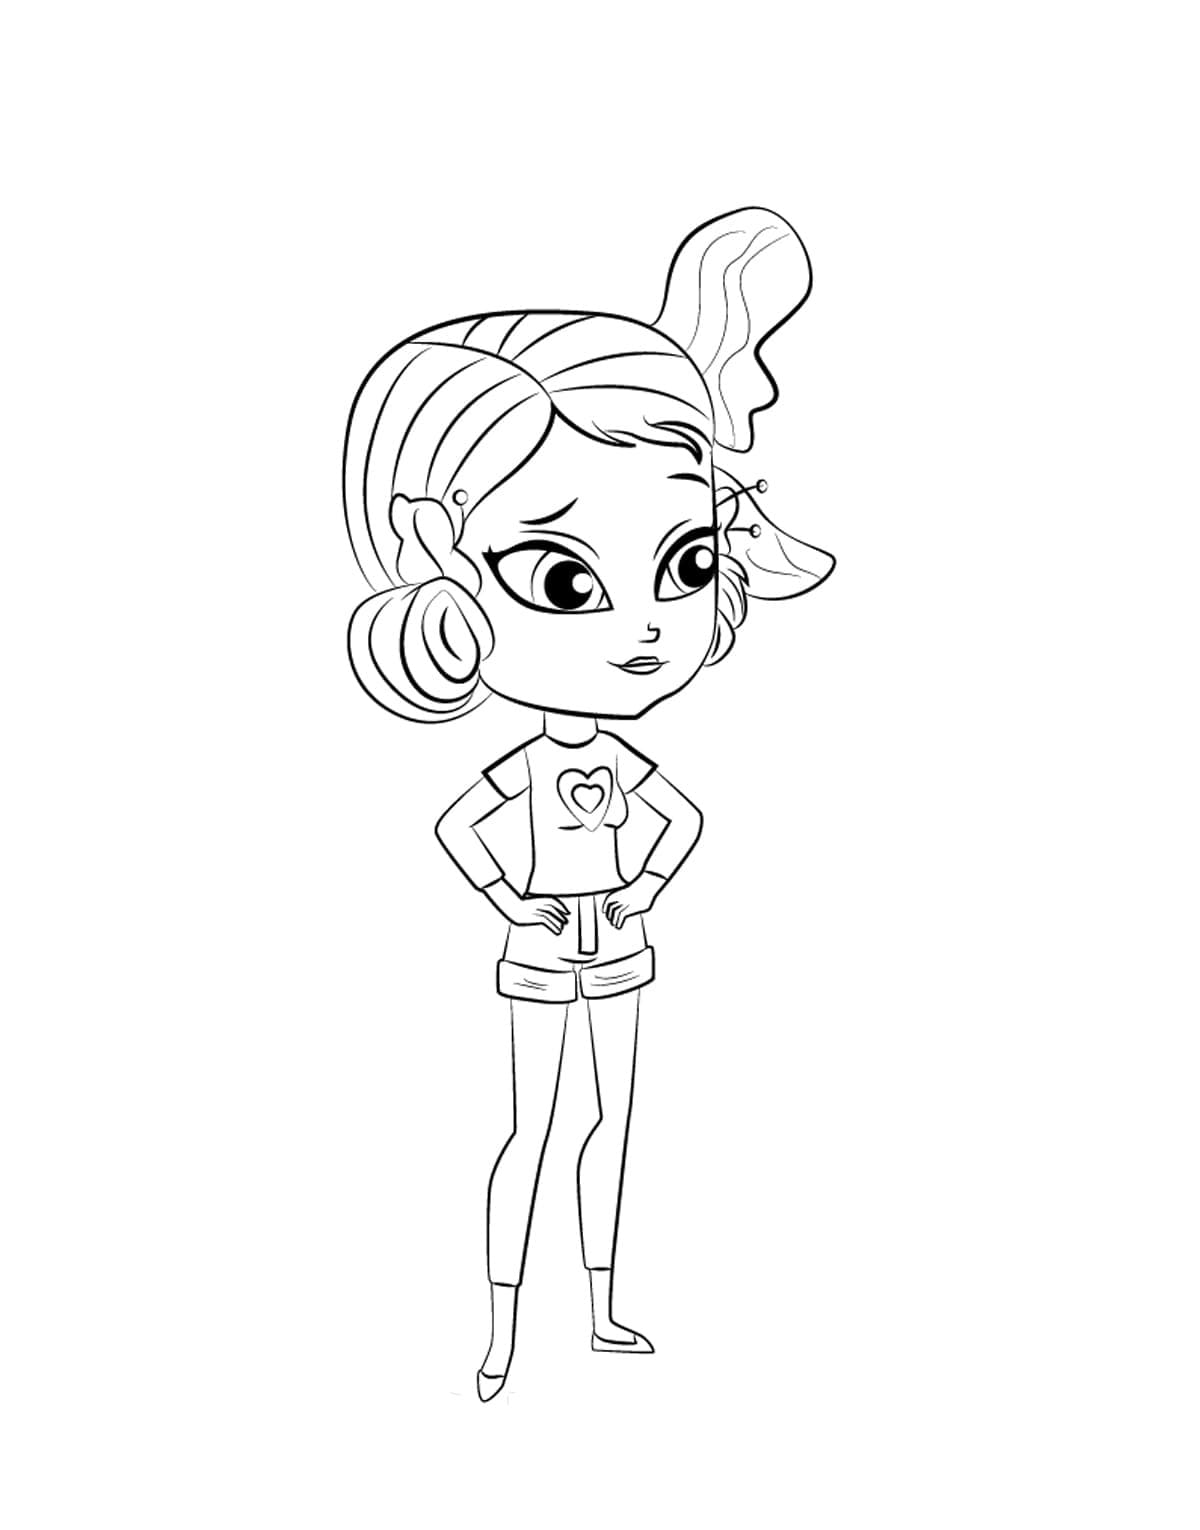 Littlest Pet Shop Youngmee Song coloring page - Download, Print or ...